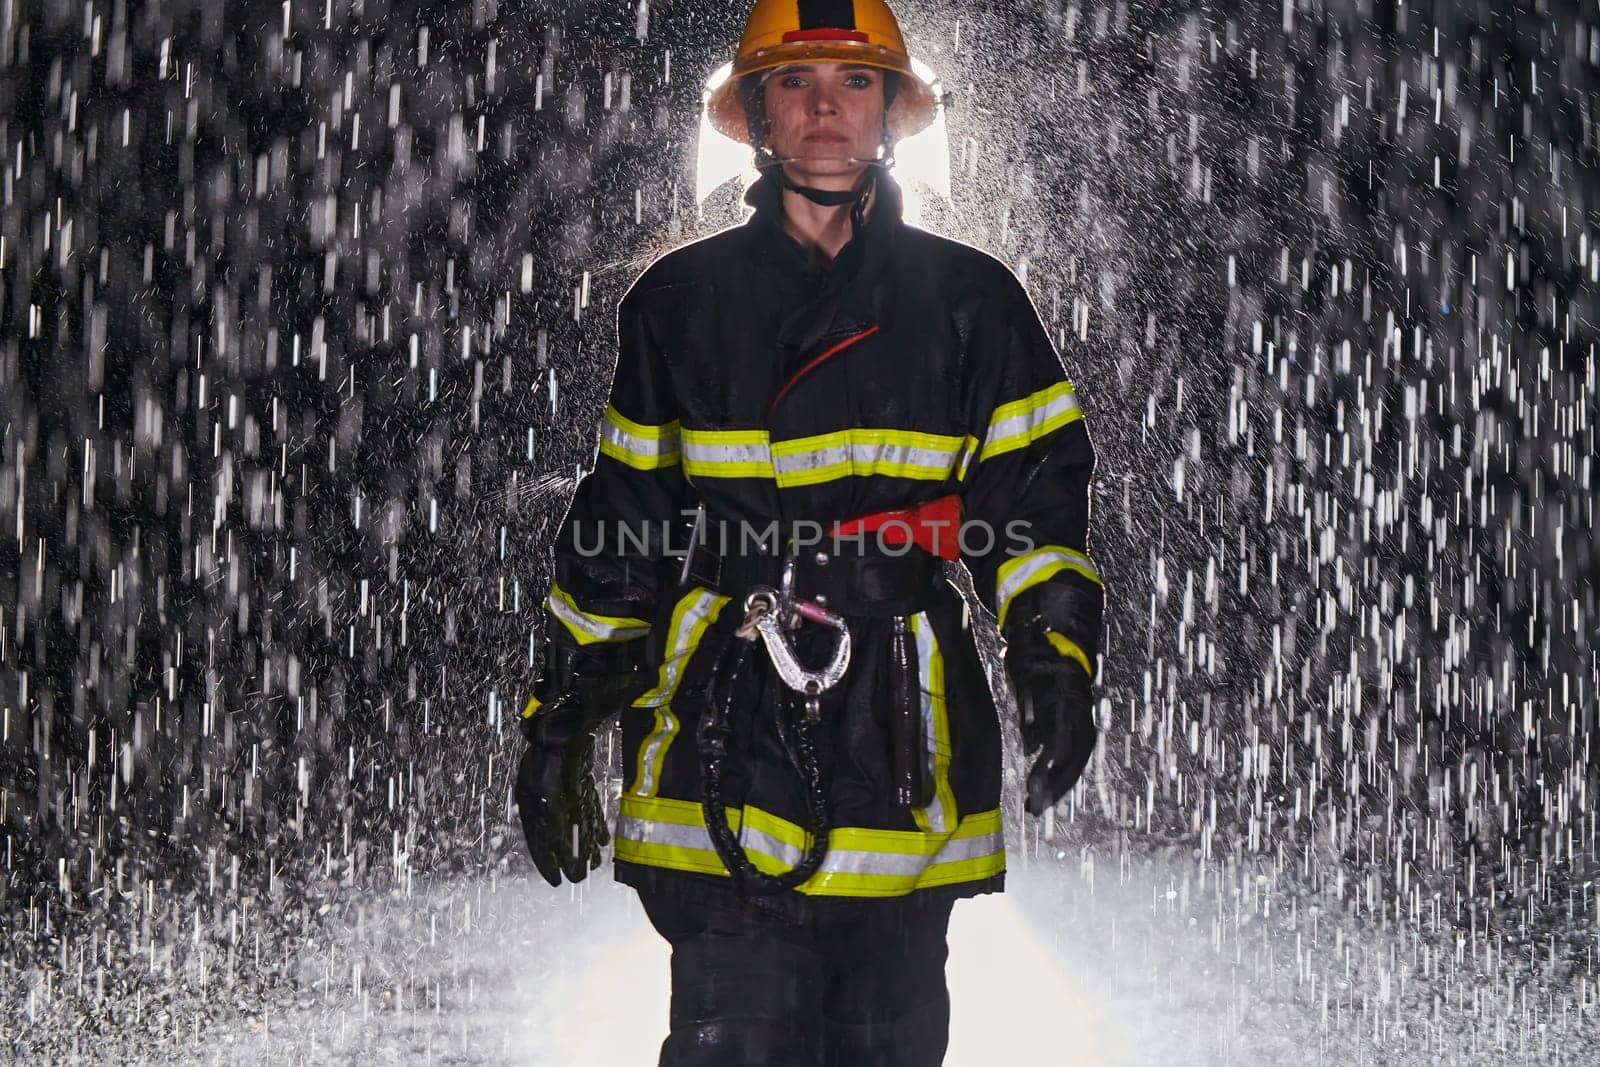 A determined female firefighter in a professional uniform striding through the dangerous, rainy night on a daring rescue mission, showcasing her unwavering bravery and commitment to saving lives